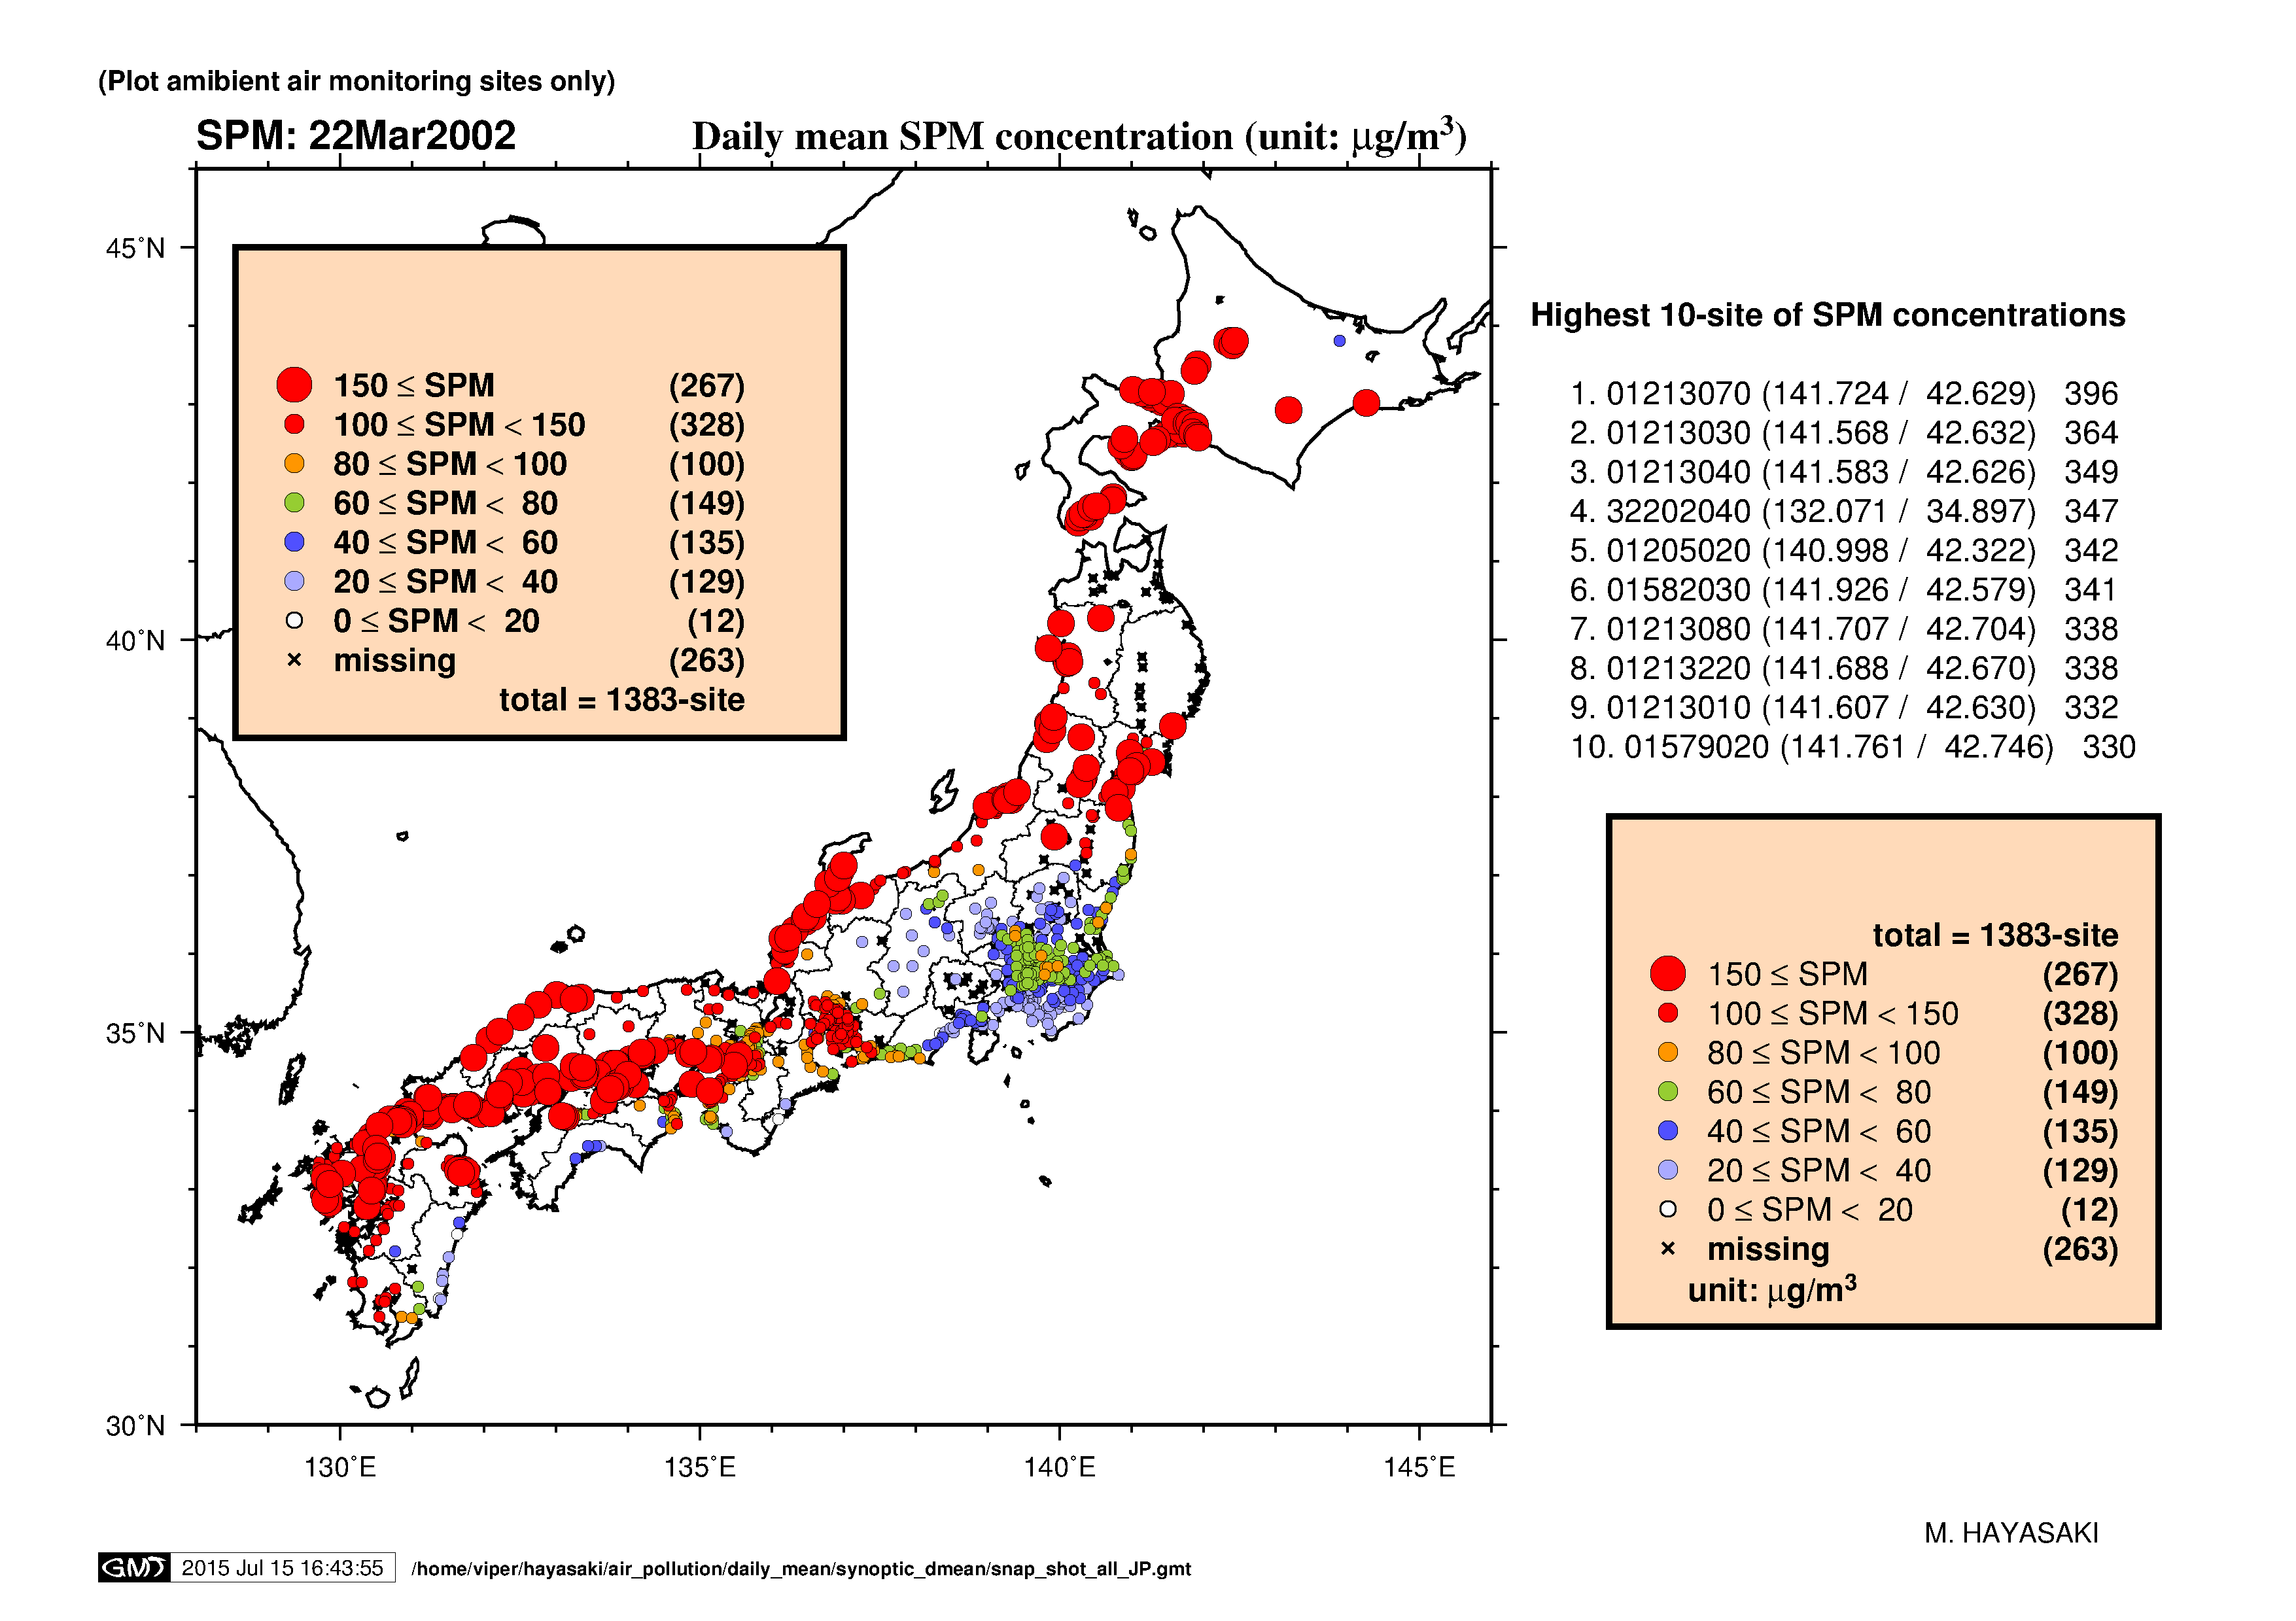 Daily mean SPM concentration in Japan (22Mar2002)